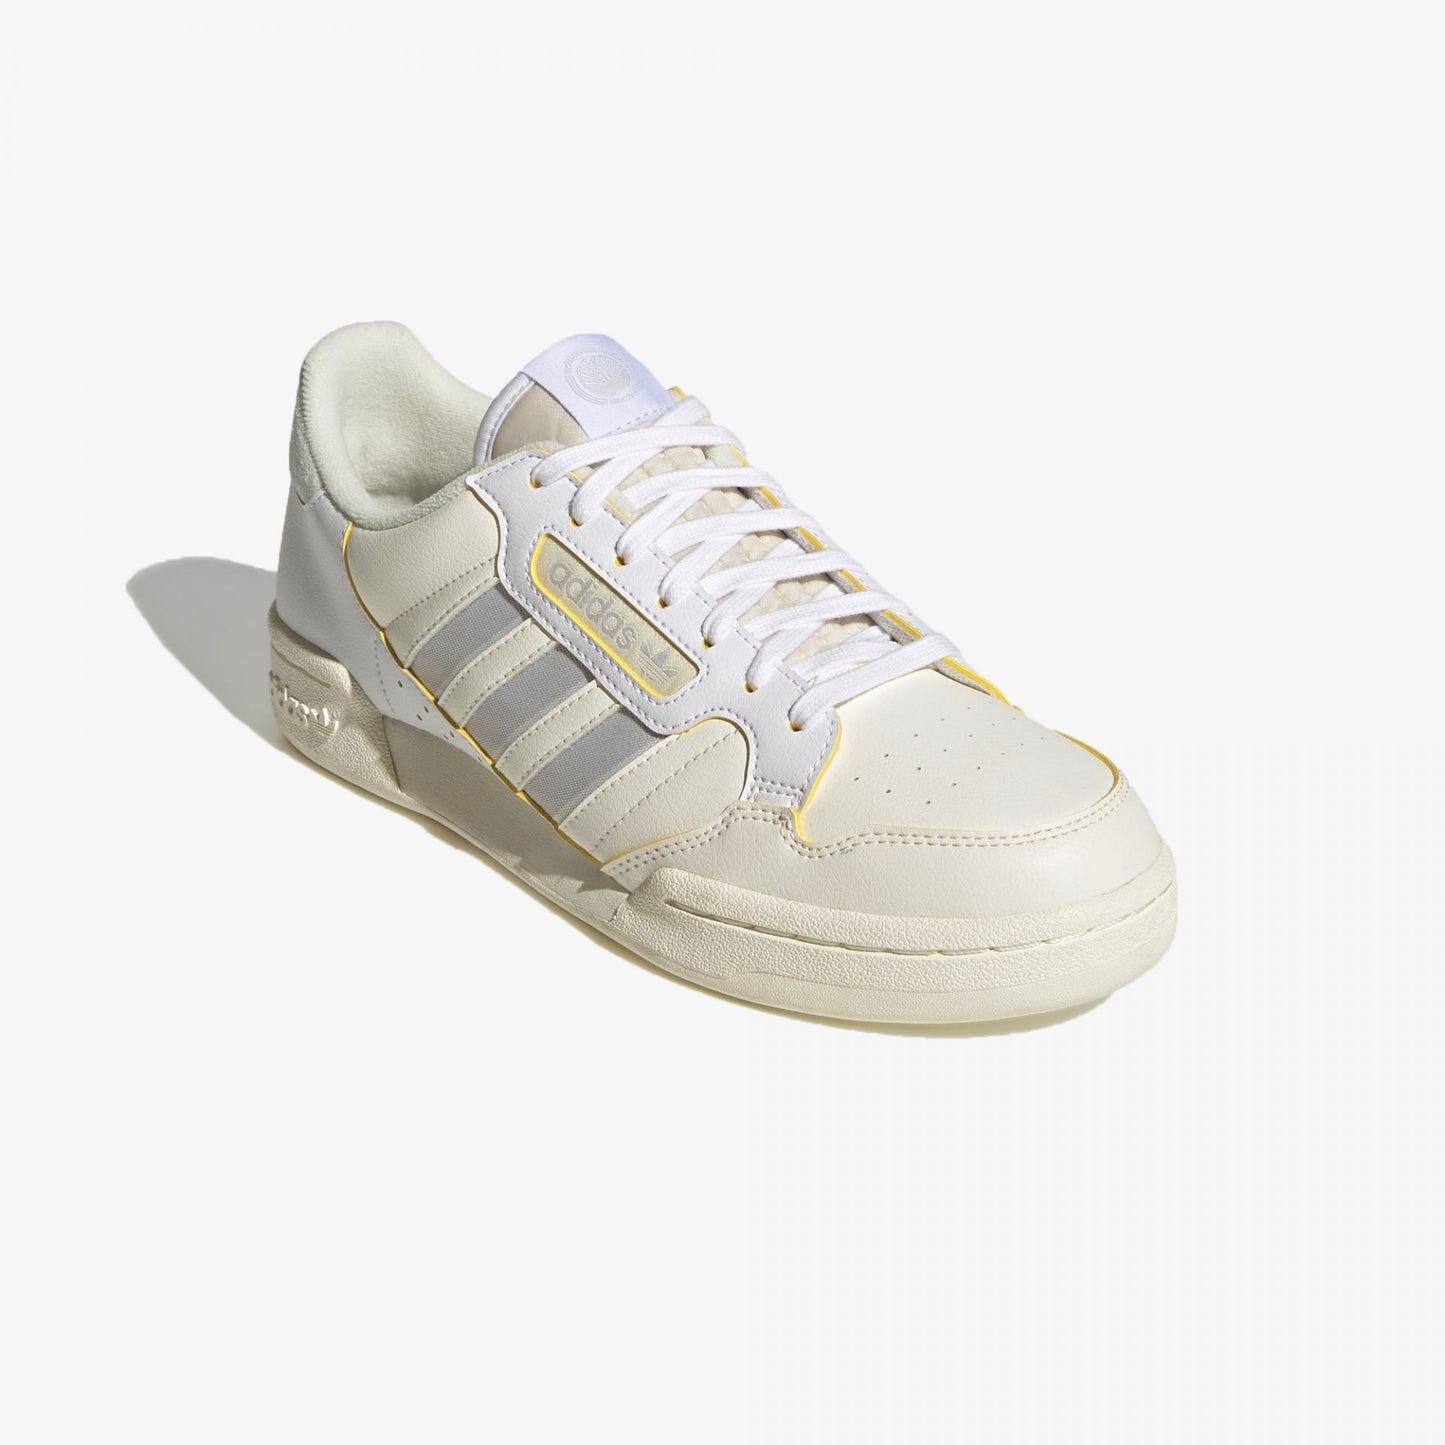 CONTINENTAL 80 STRIPES 'CLOUD WHITE/GREY ONE'